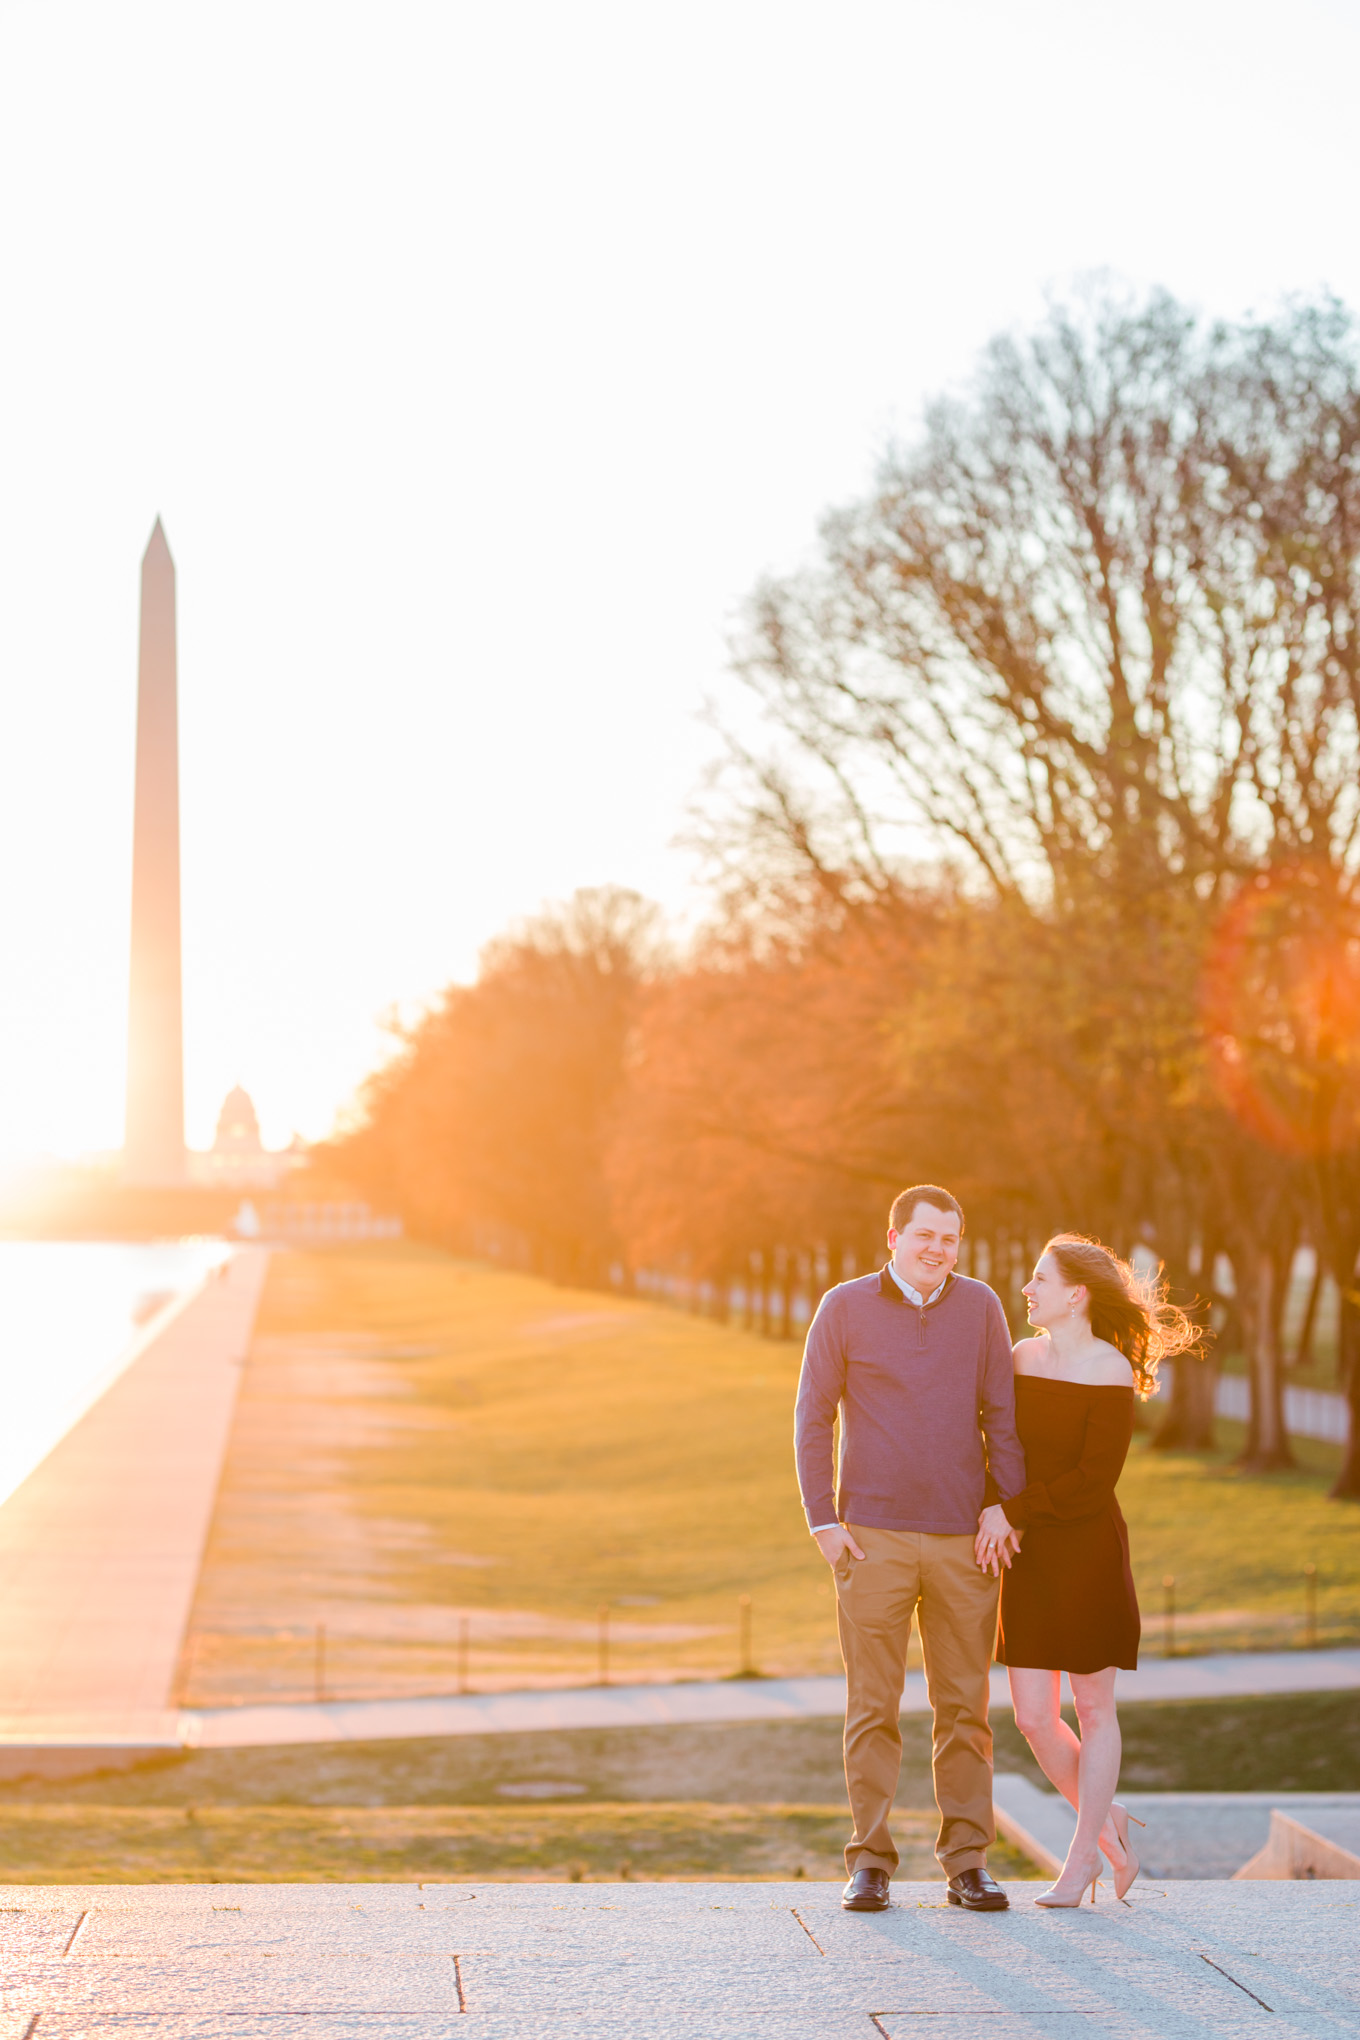 sunrise Lincoln Memorial engagement photos, Washington, D.C. engagement photos, Washington D.C. engagement photos, sunrrise engagement photos, cherry blossom engagement photos, D.C. cherry bloossoms, D.C. cherry blossoms photos, cherry blossom photos, cherry blossoms portrraits, Lincoln Memorial engagement photos, classic engagement photos, Rachel E.H. Photography, engagement session style, morning magic hour